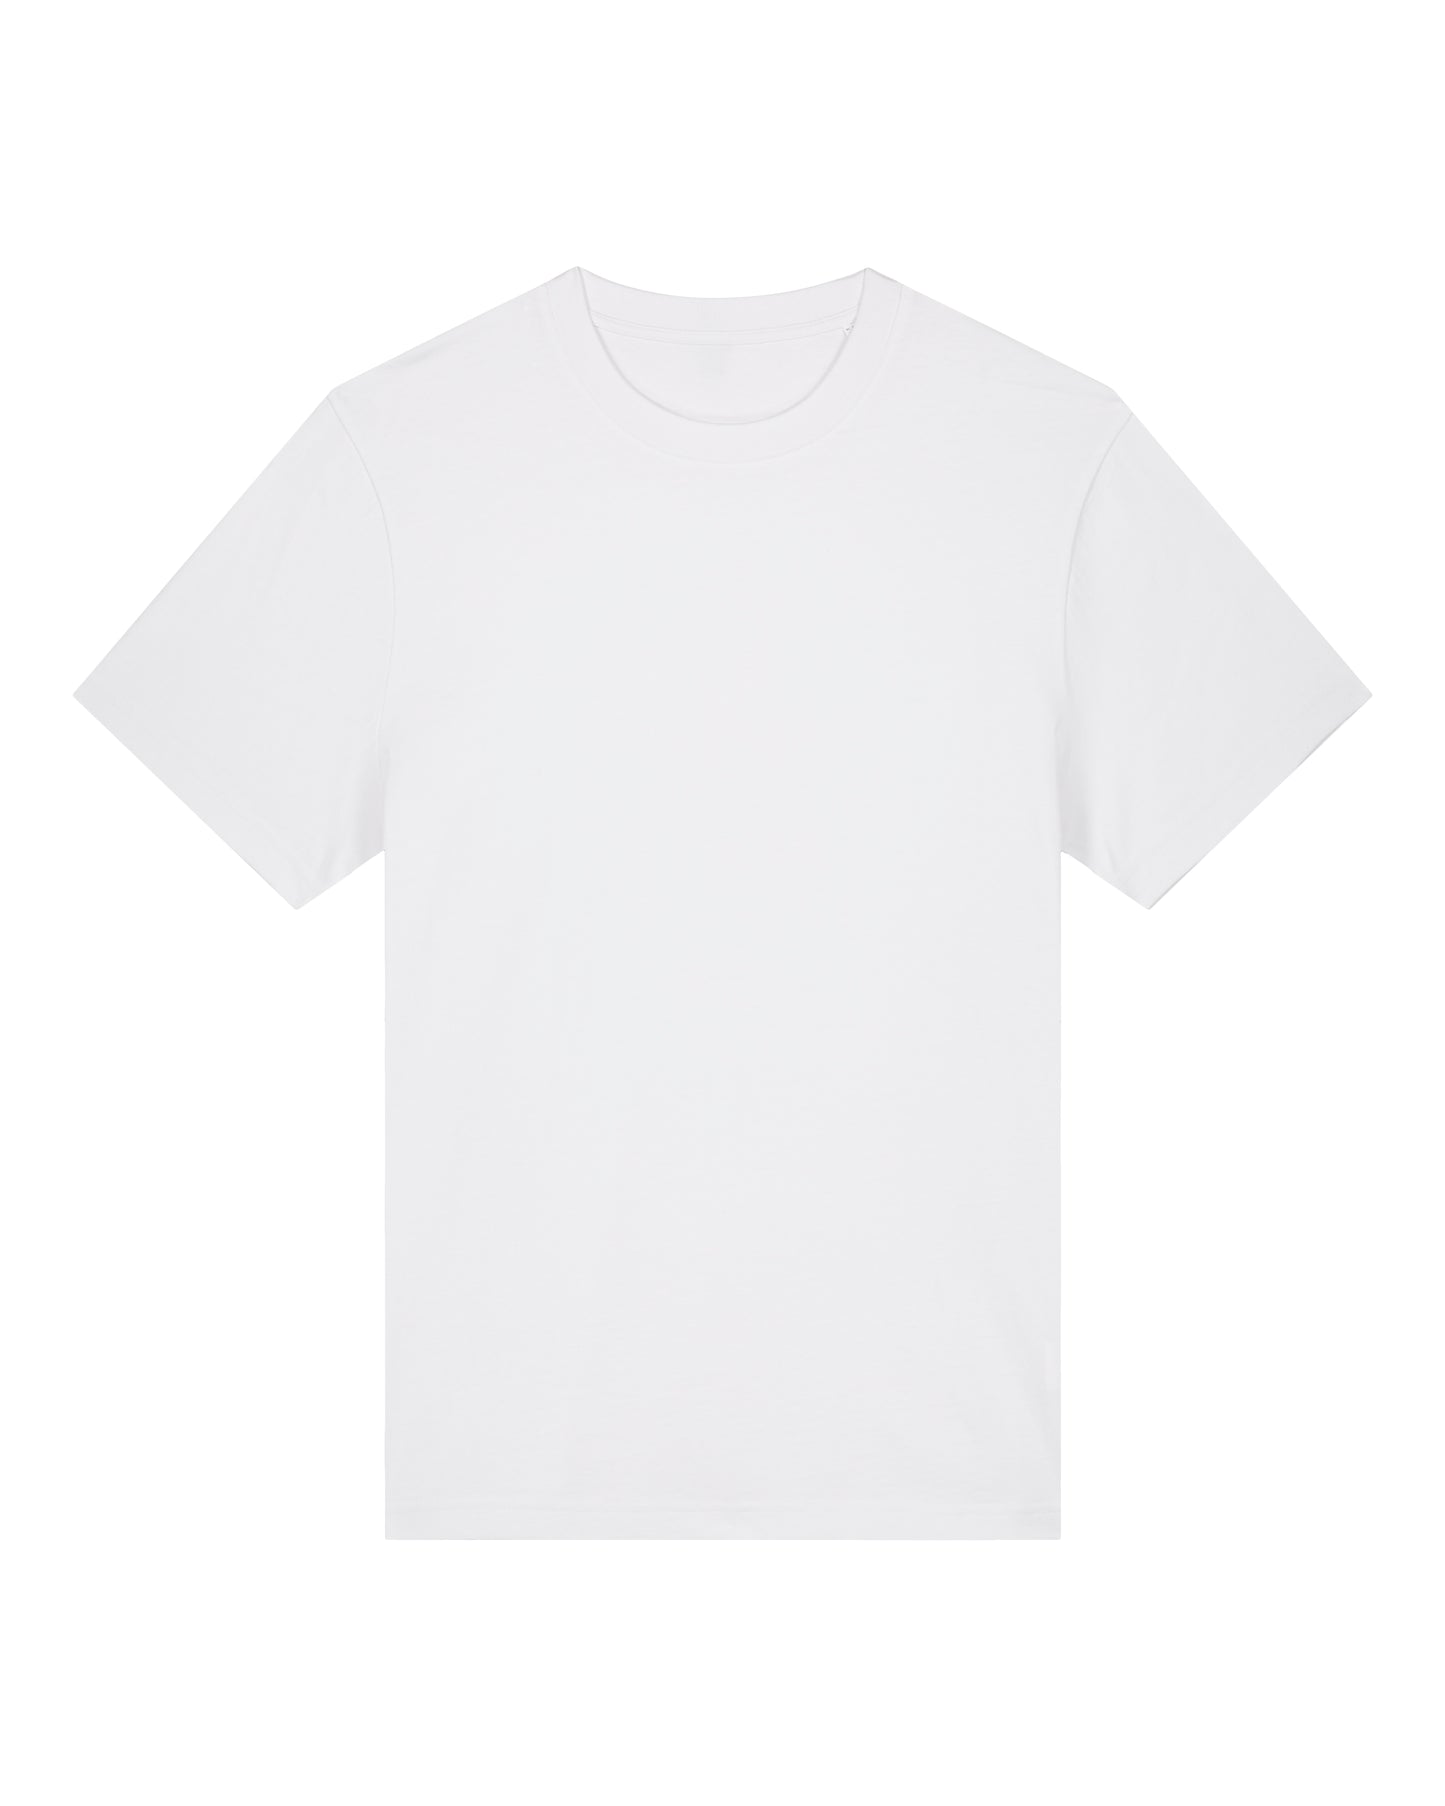 It Fits Swish - Unisex Relaxed Fit T-shirt - Heavyweight -White